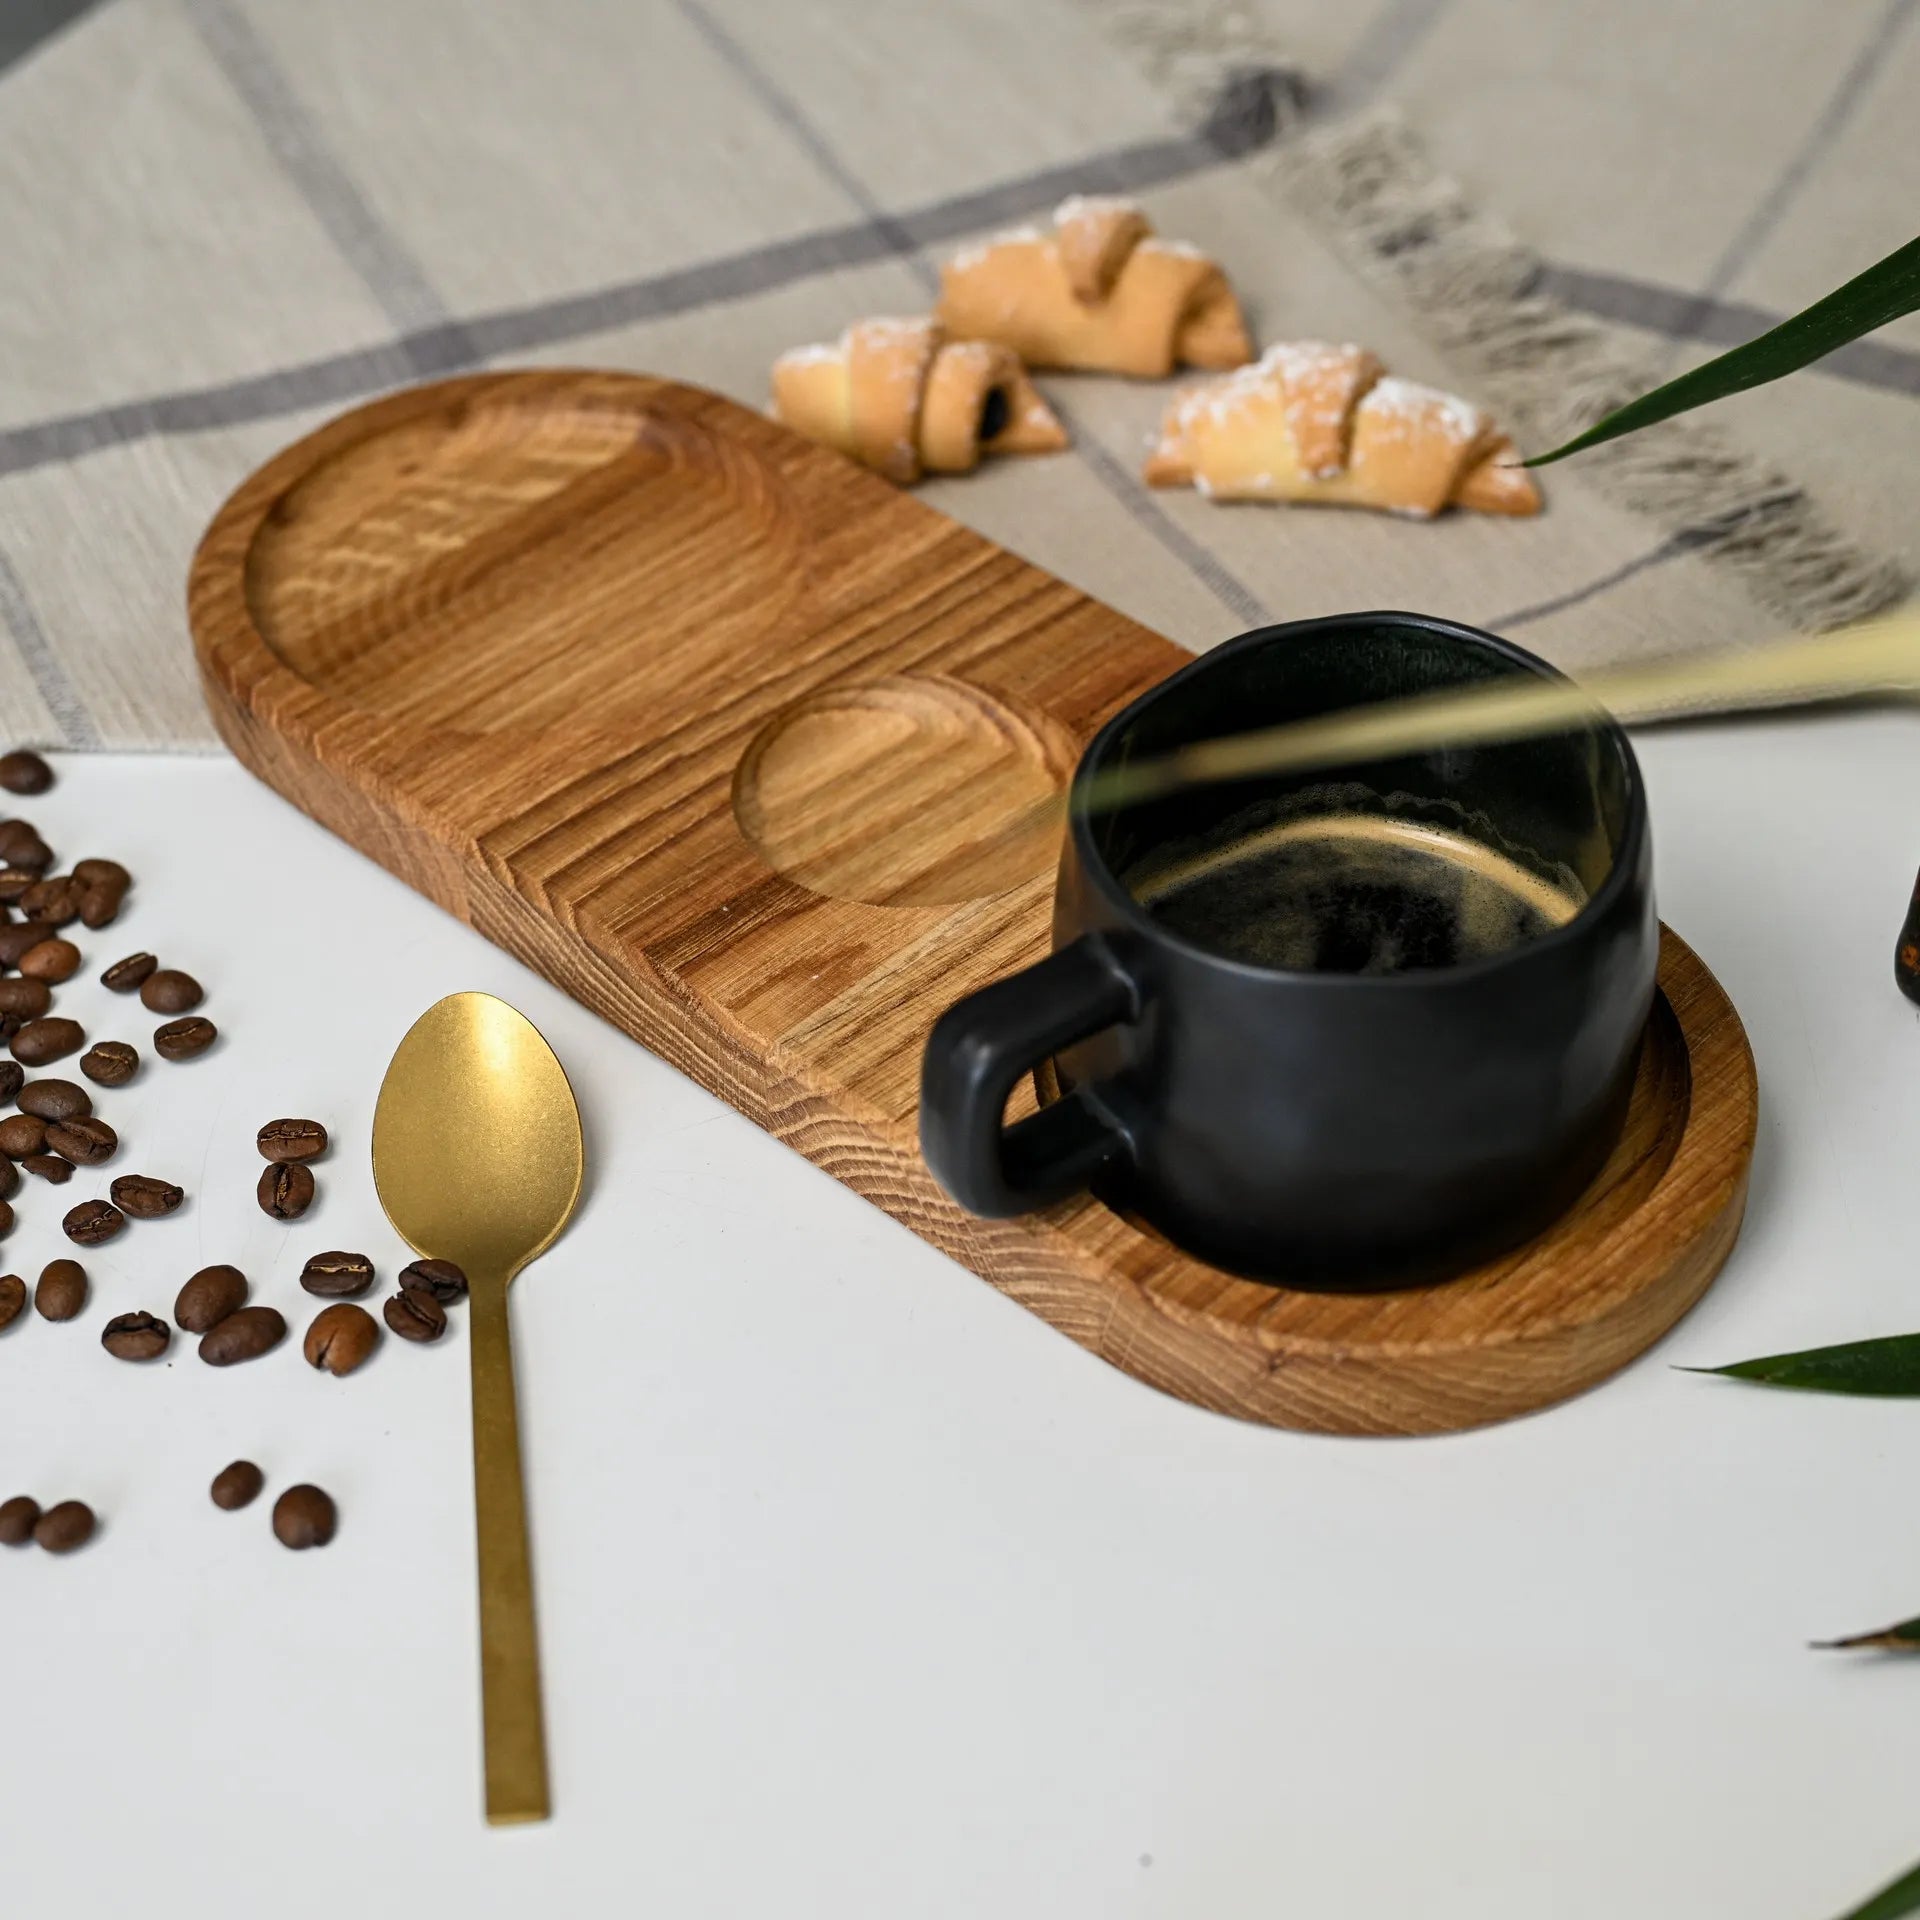 Wooden serving tray for cafes, personalized for a unique touch, perfect for enhancing the presentation of food and drinks.